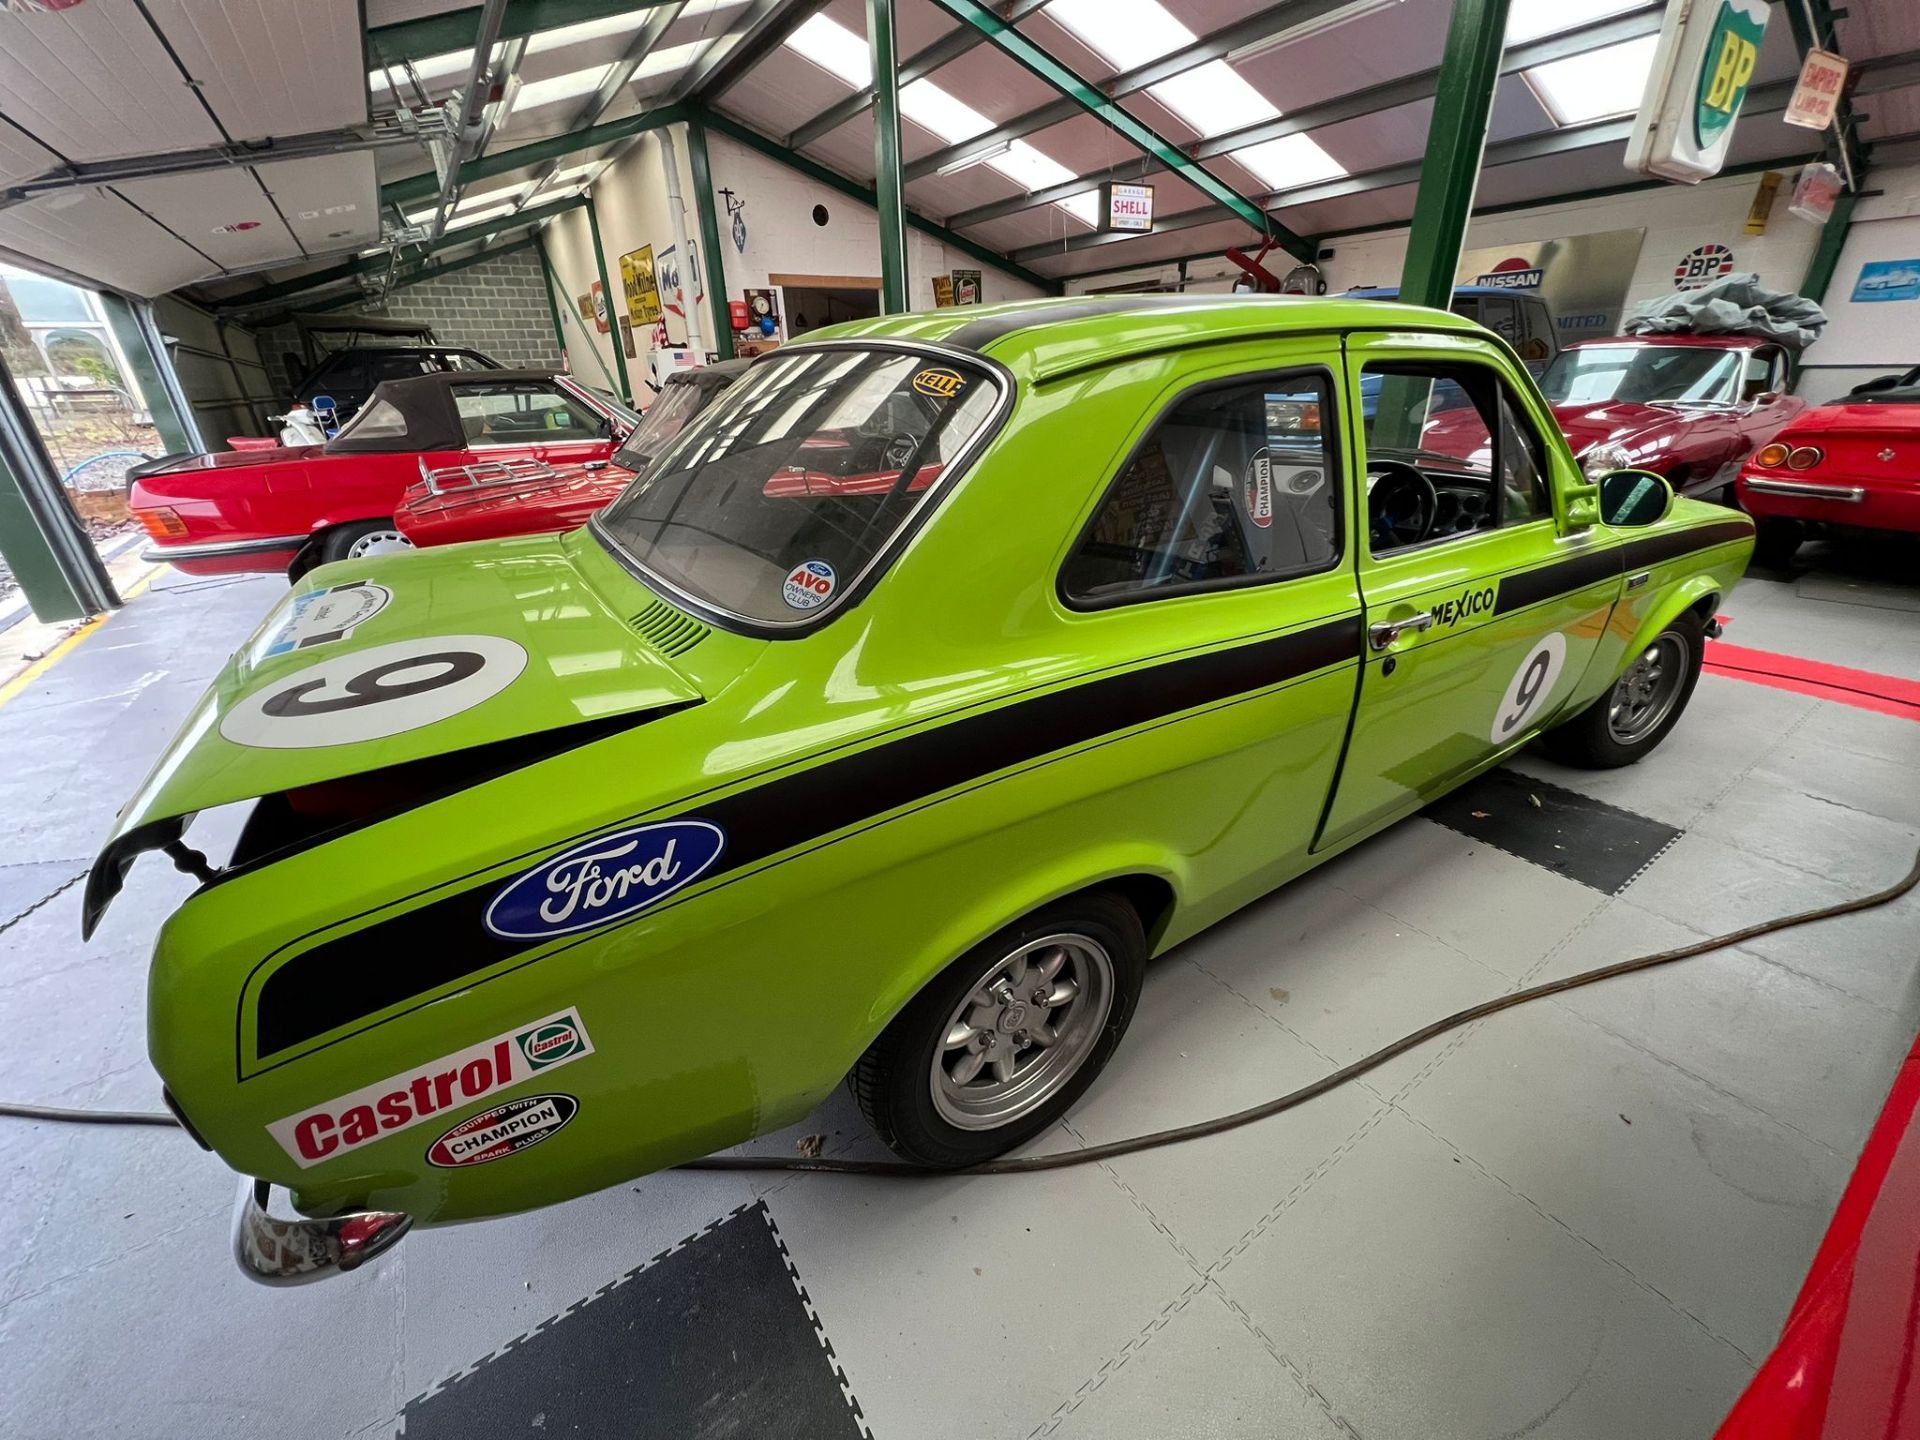 Ford Escort Mk1 X-Sport Mexico Competition Car 1973 - Image 8 of 16